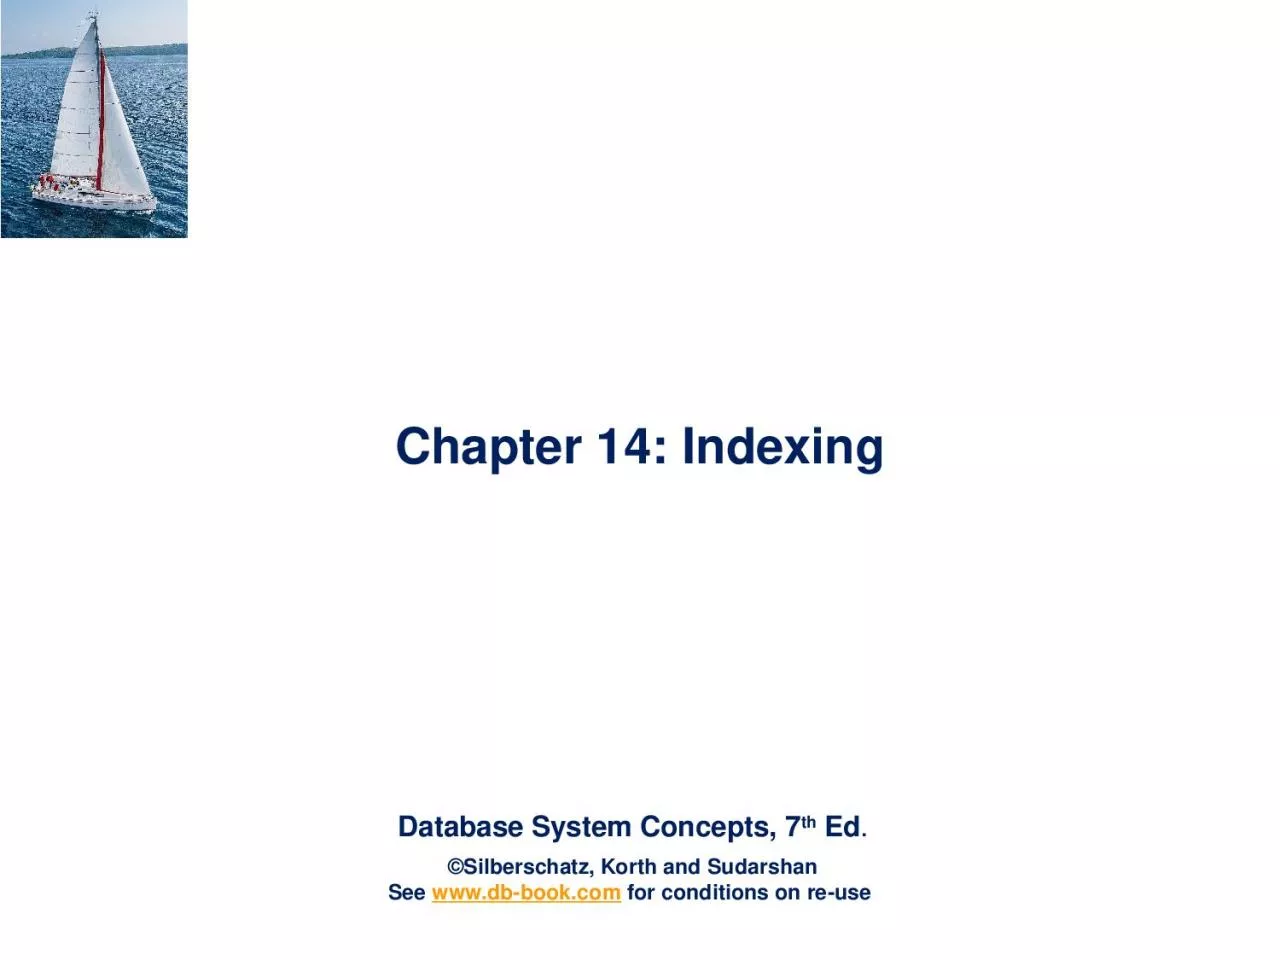 Chapter 14: Indexing Outline